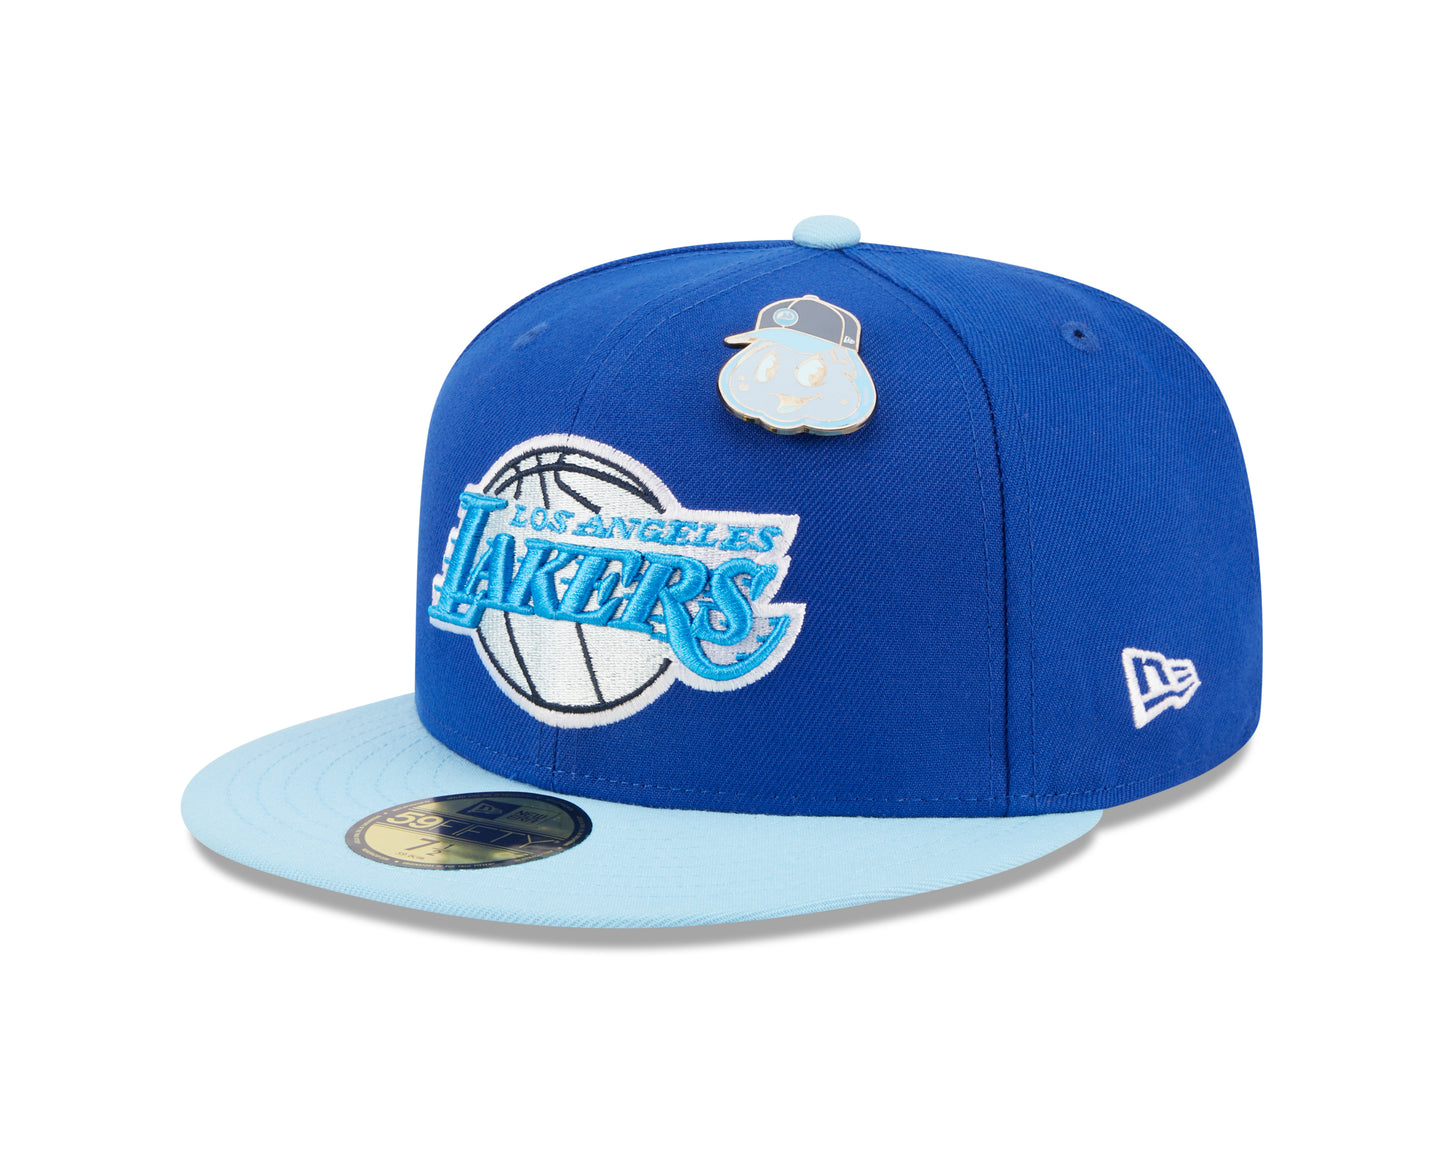 New Era 59fifty Fitted Cap Los Angeles Lakers THE ELEMENTS - Blue/Sky Blue - Headz Up 